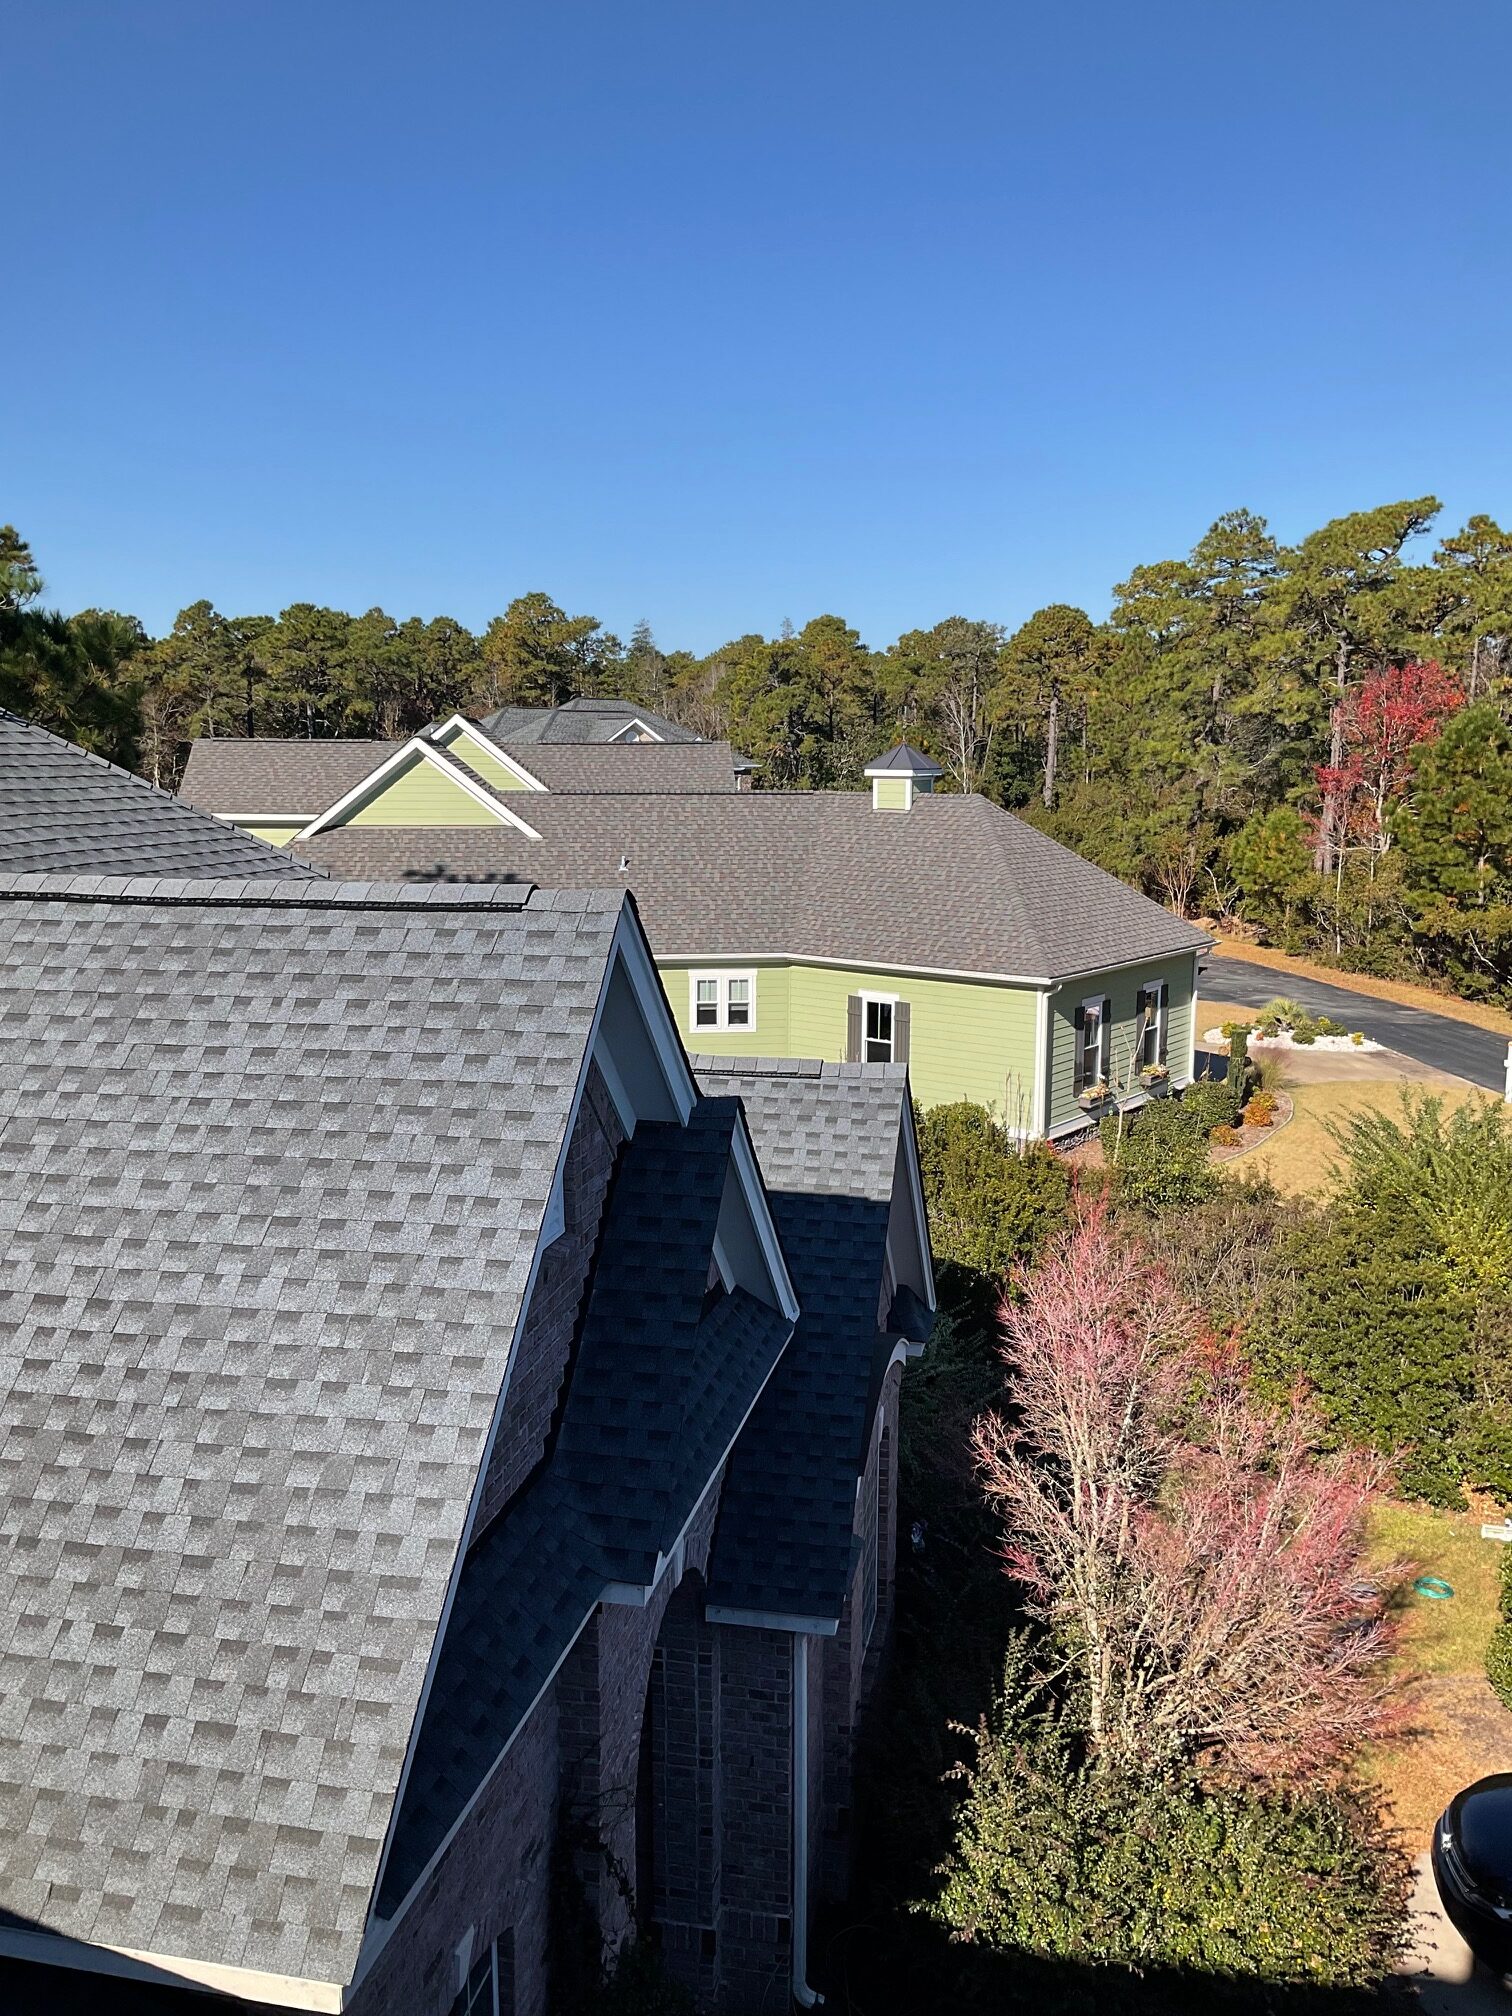 Roofing Contractor, Roof Replacement by Neighbor Metal Roof After Photo